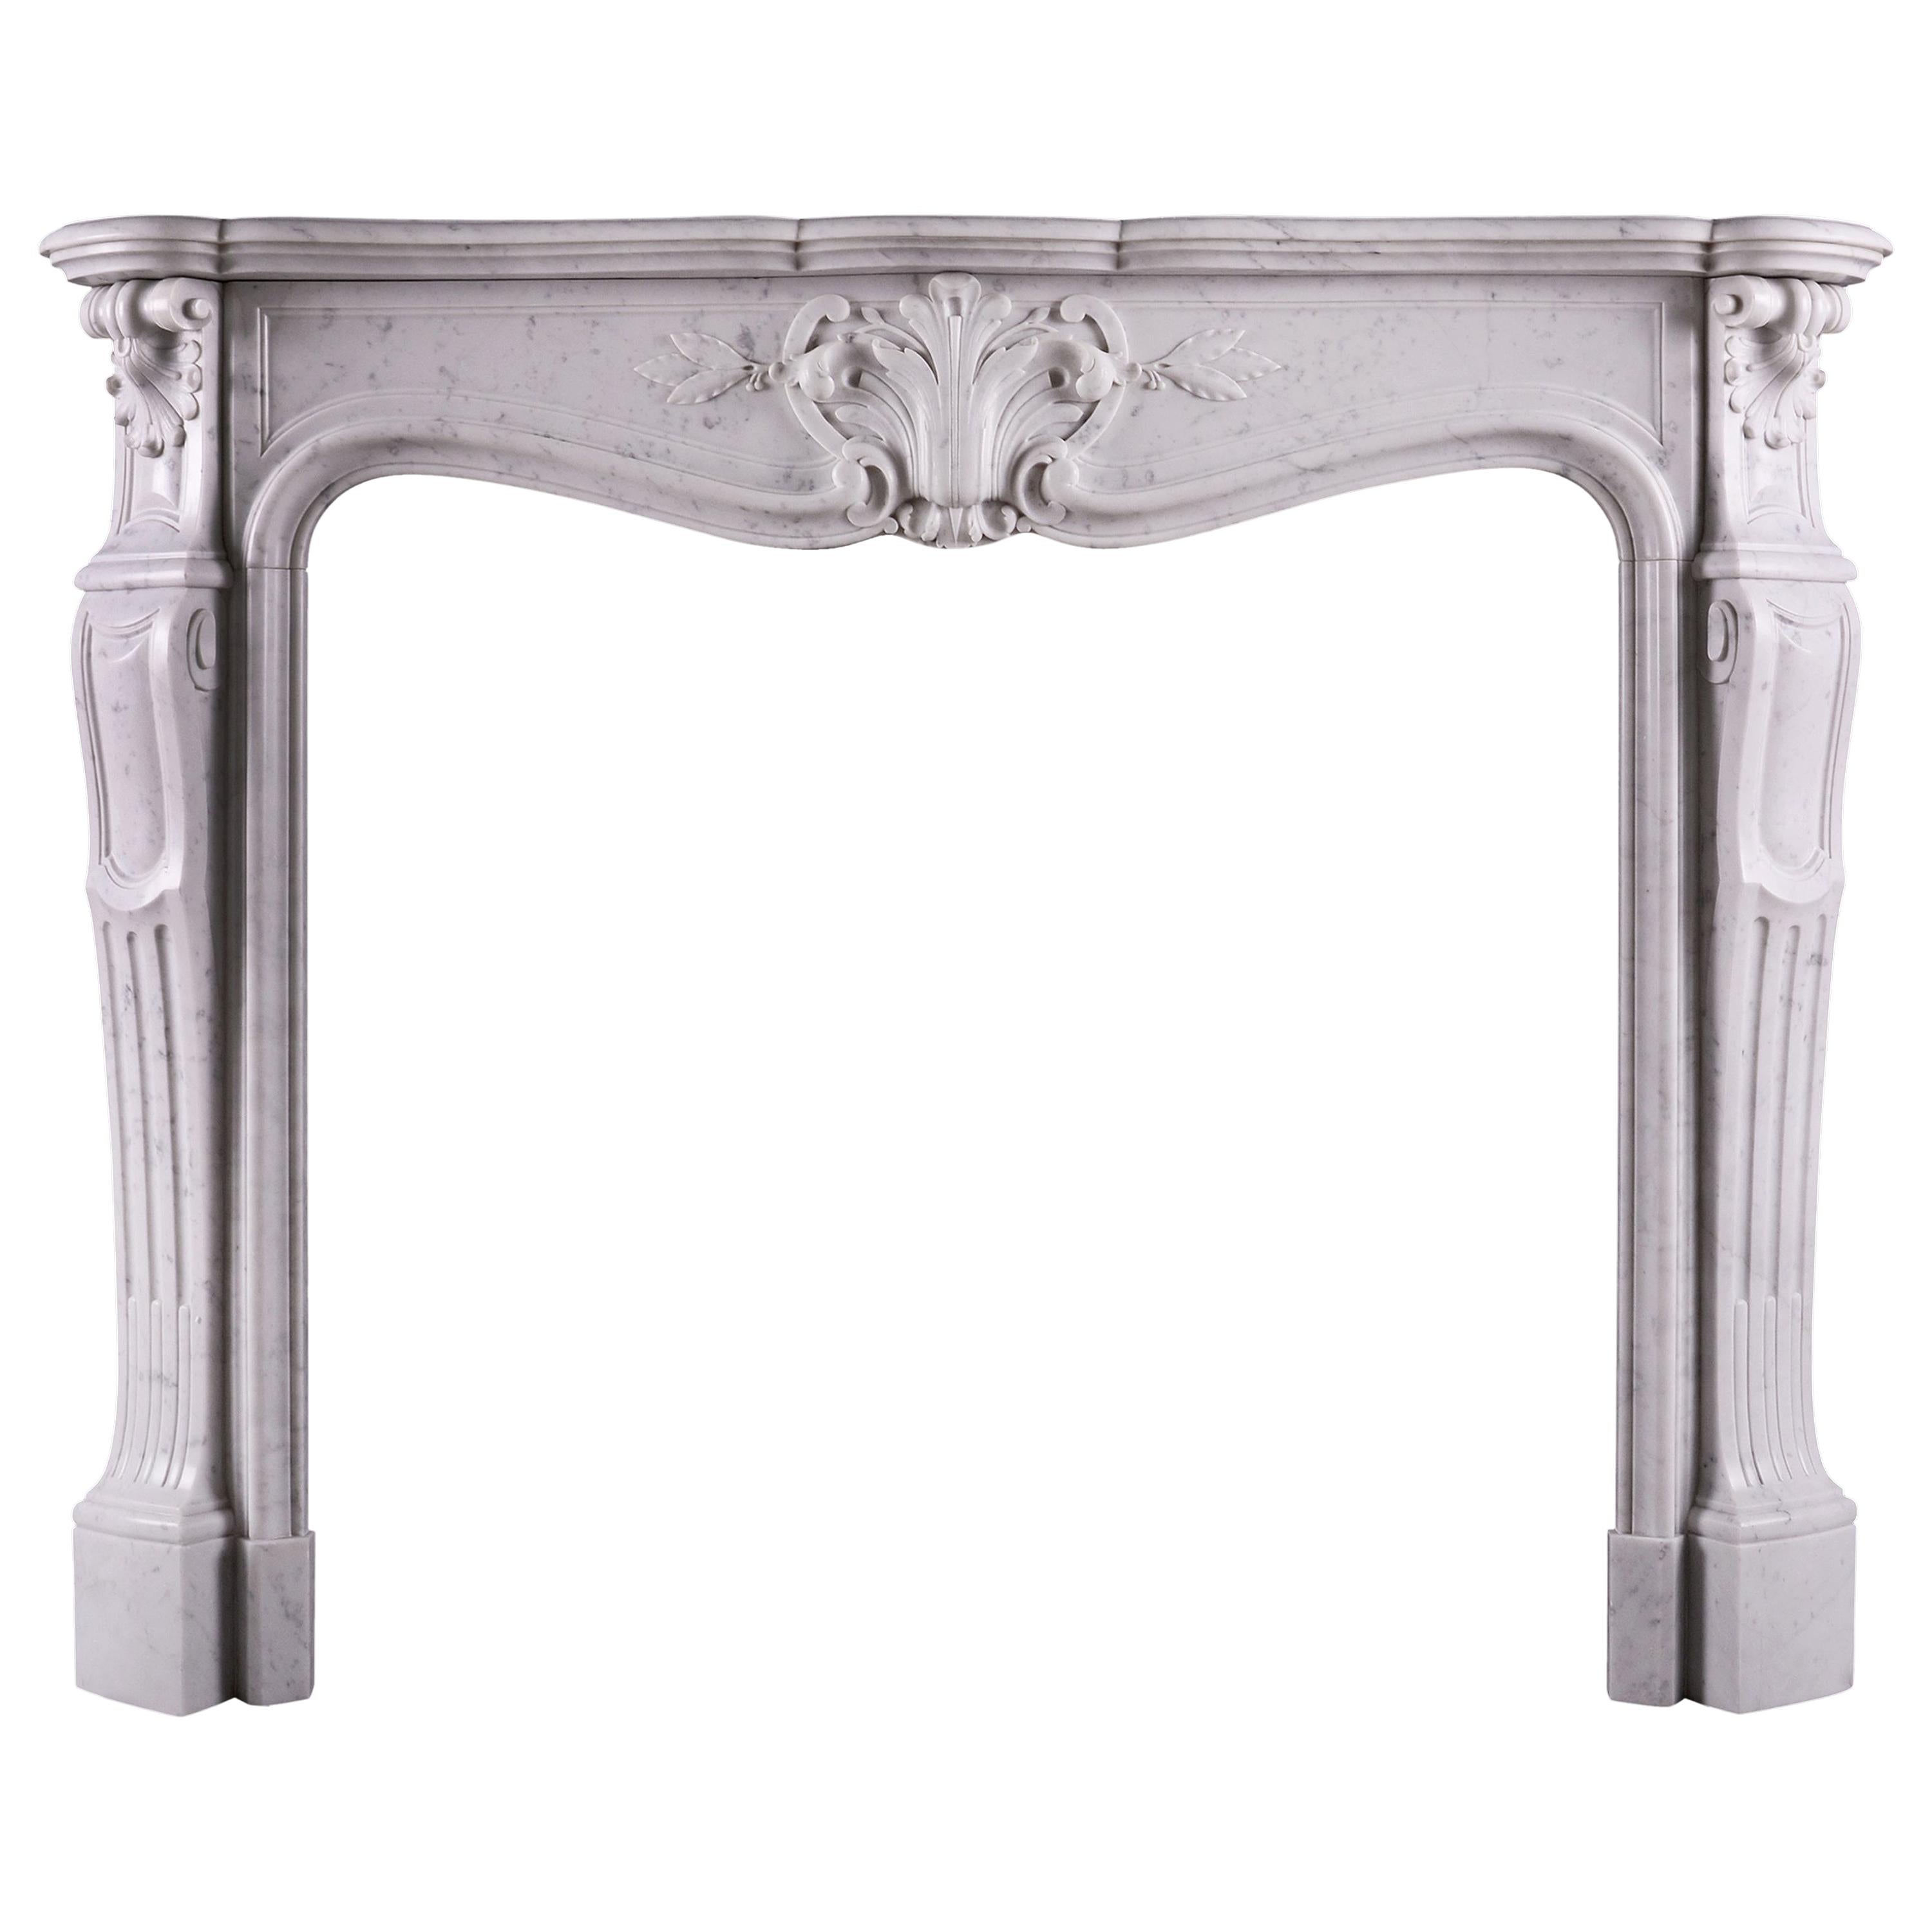 A 19th Century French Carrara Marble Fireplace in the Louis XV Style For Sale